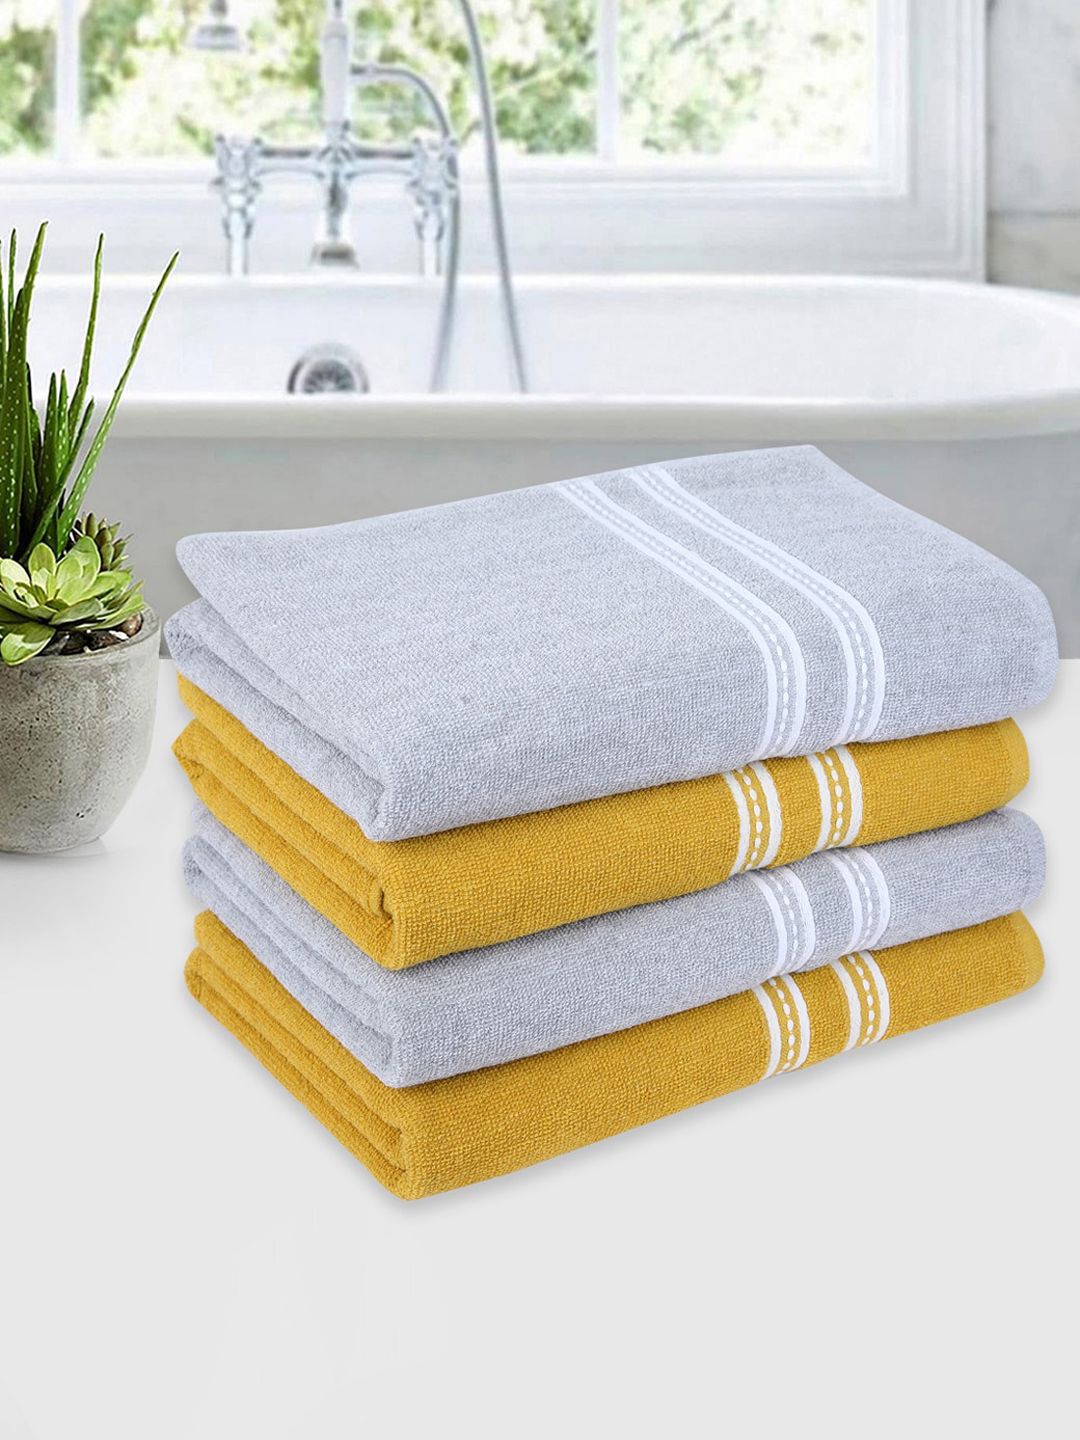 ROMEE Set Of 4 Yellow & Silver Solid 500 GSM Cotton Bath Towels Price in India